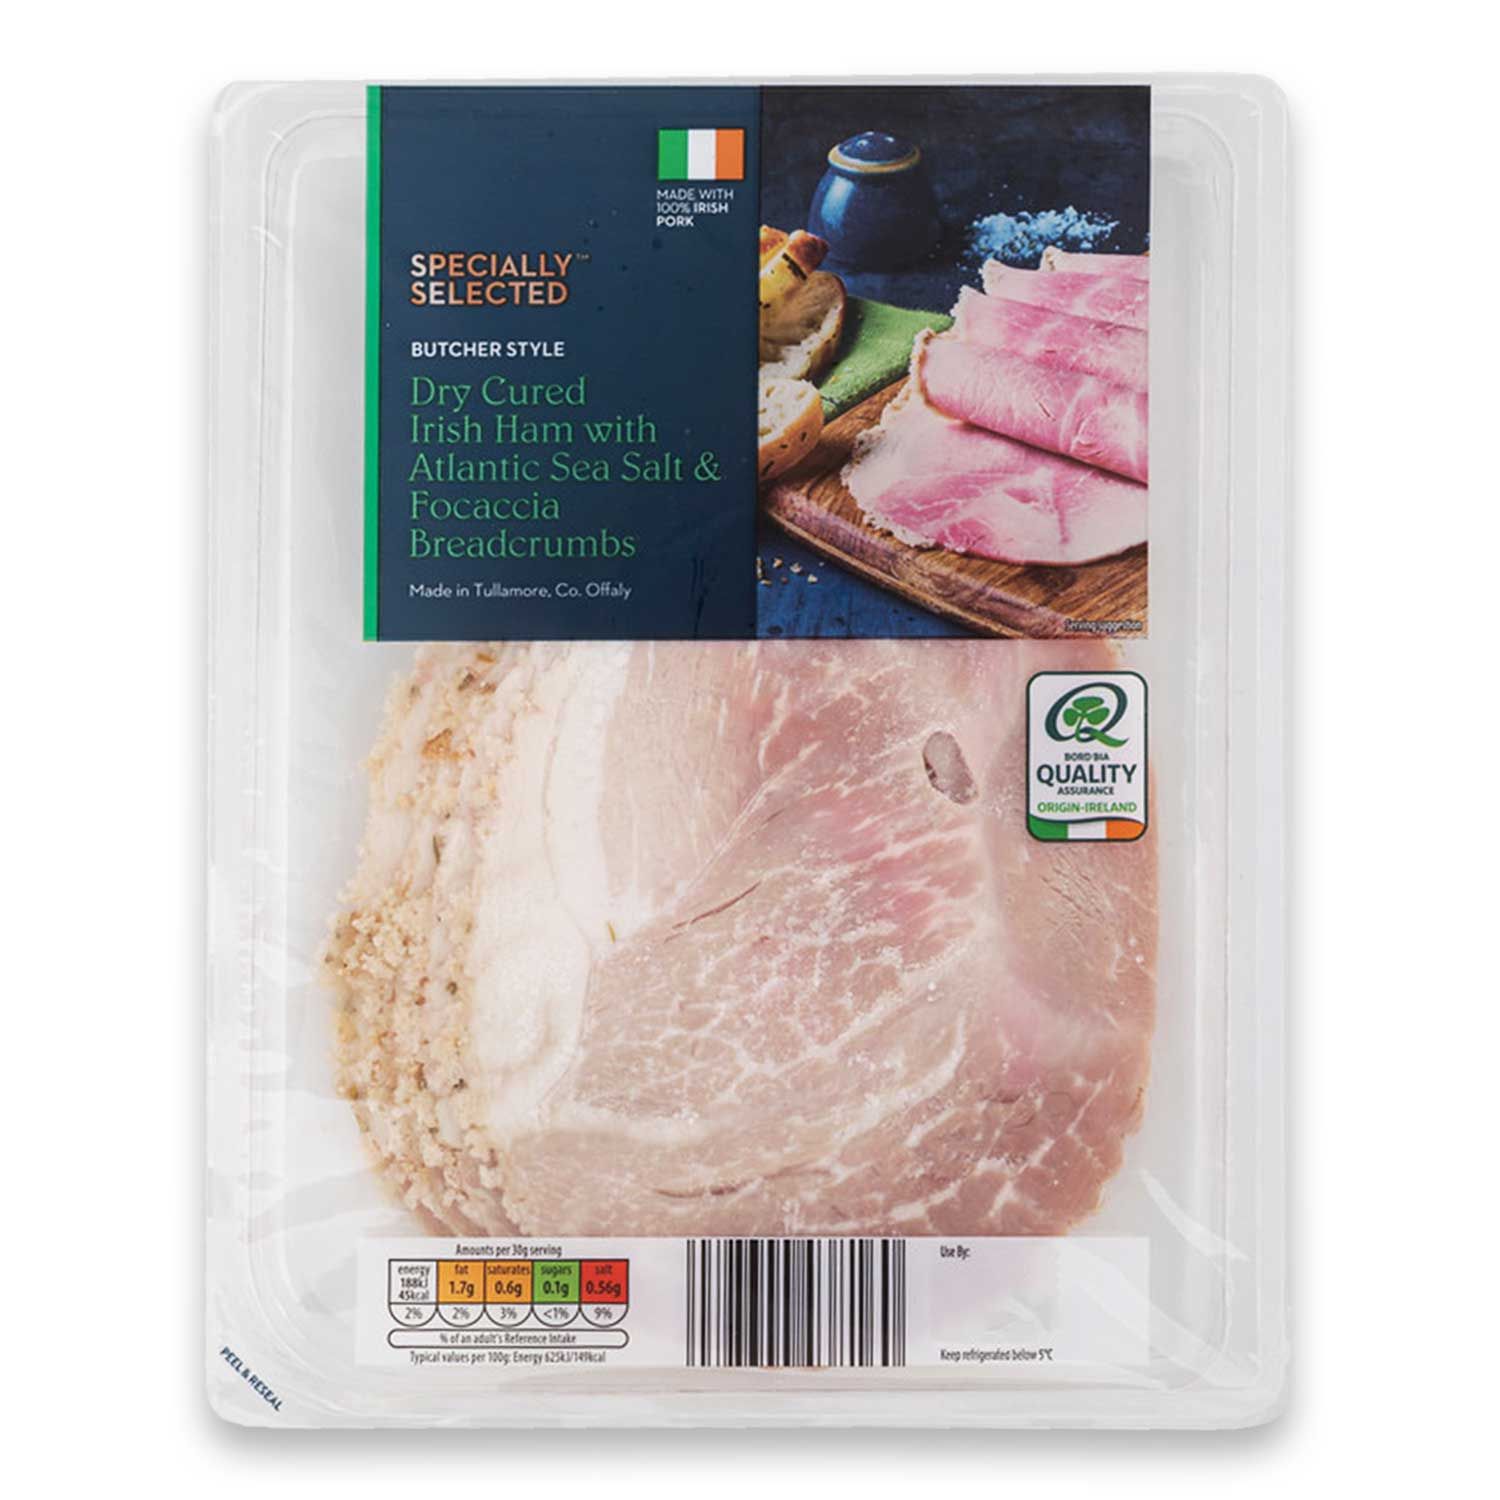 Butcher Style Dry Cured Irish Ham With Atlantic Sea Salt & Focaccia  Breadcrumbs 150g Specially Selected 